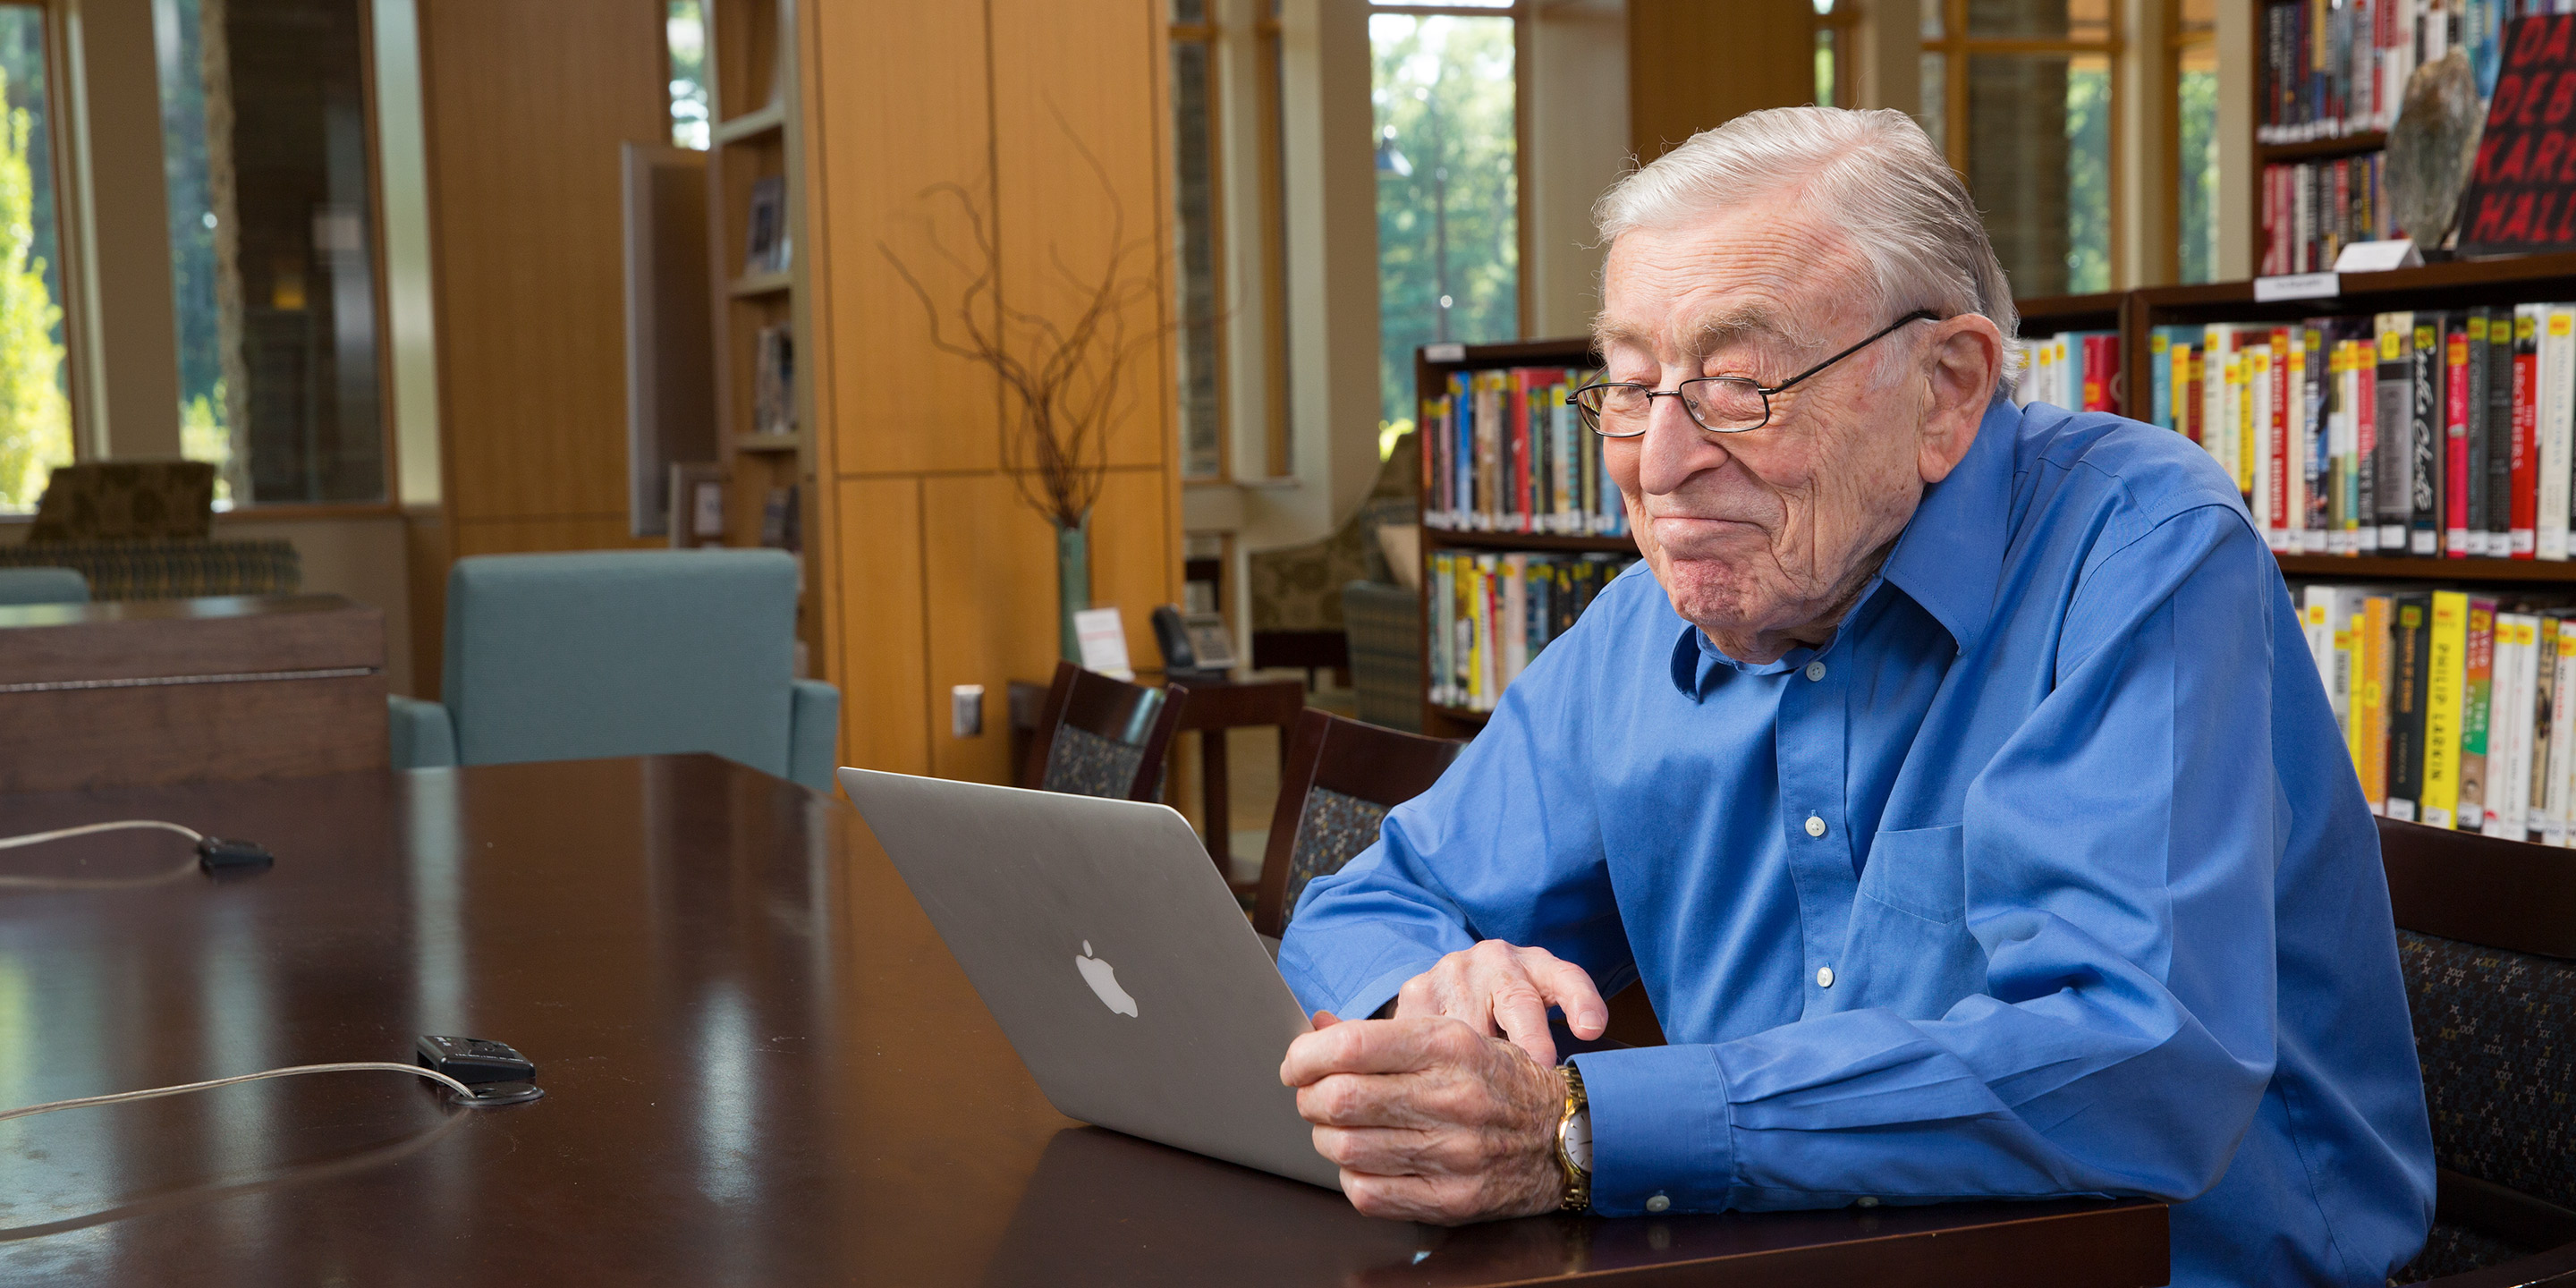 An older man smiles while using a laptop.